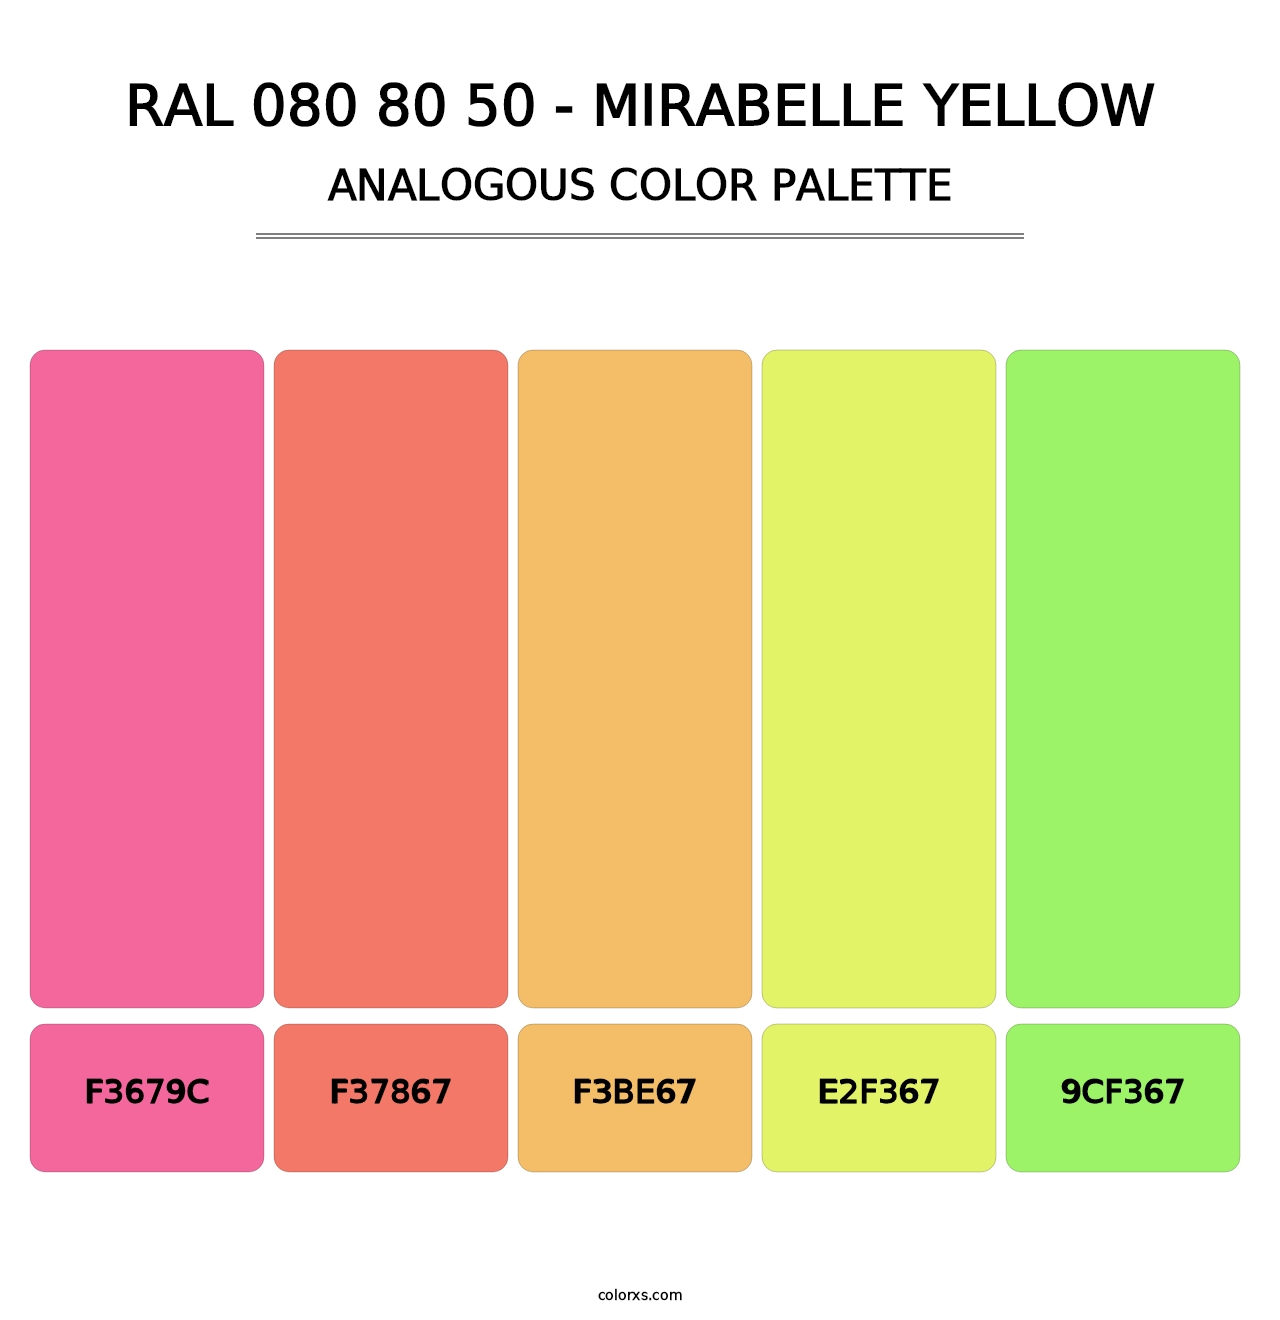 RAL 080 80 50 - Mirabelle Yellow - Analogous Color Palette